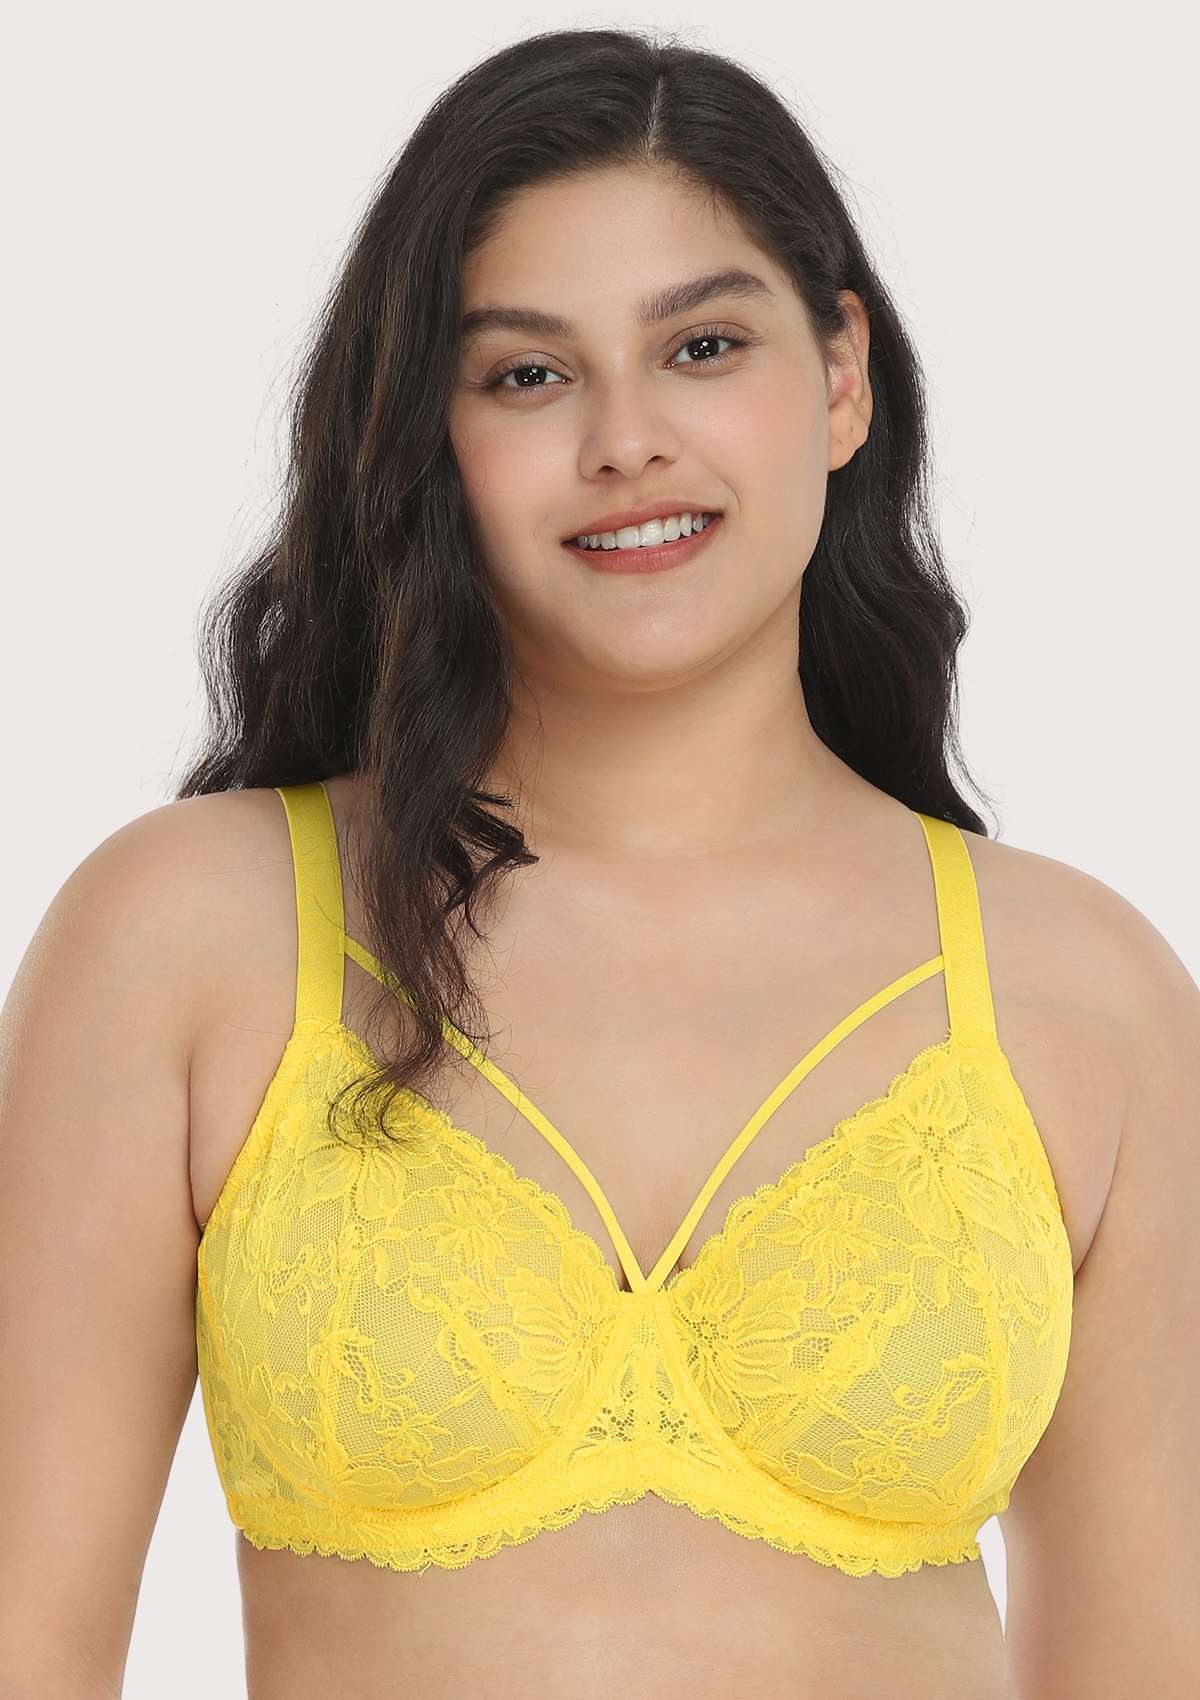 HSIA Unlined Lace Mesh Minimizer Bra For Large Breasts, Full Coverage - Bright Green / 46 / C